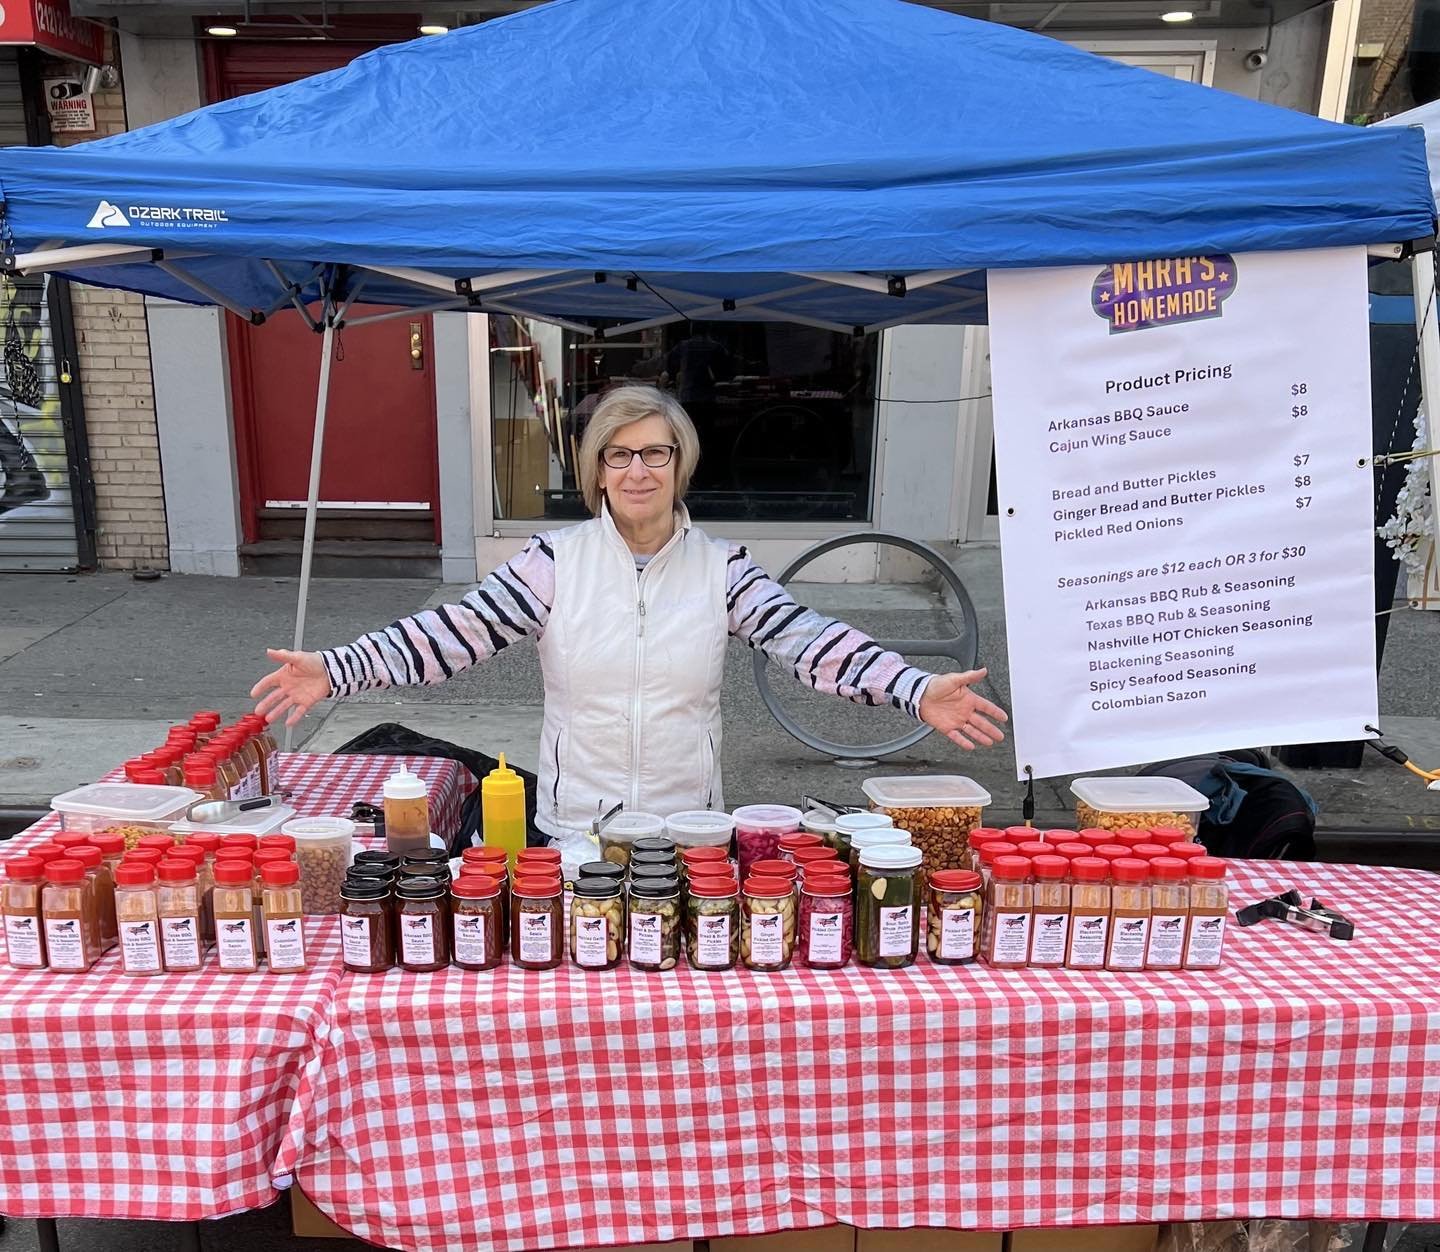 We are set up and ready to serve you! 8th Avenue between 18 and 19th streets #streetfair #nyc #seasonings #pickles #sauces #seeyousoon